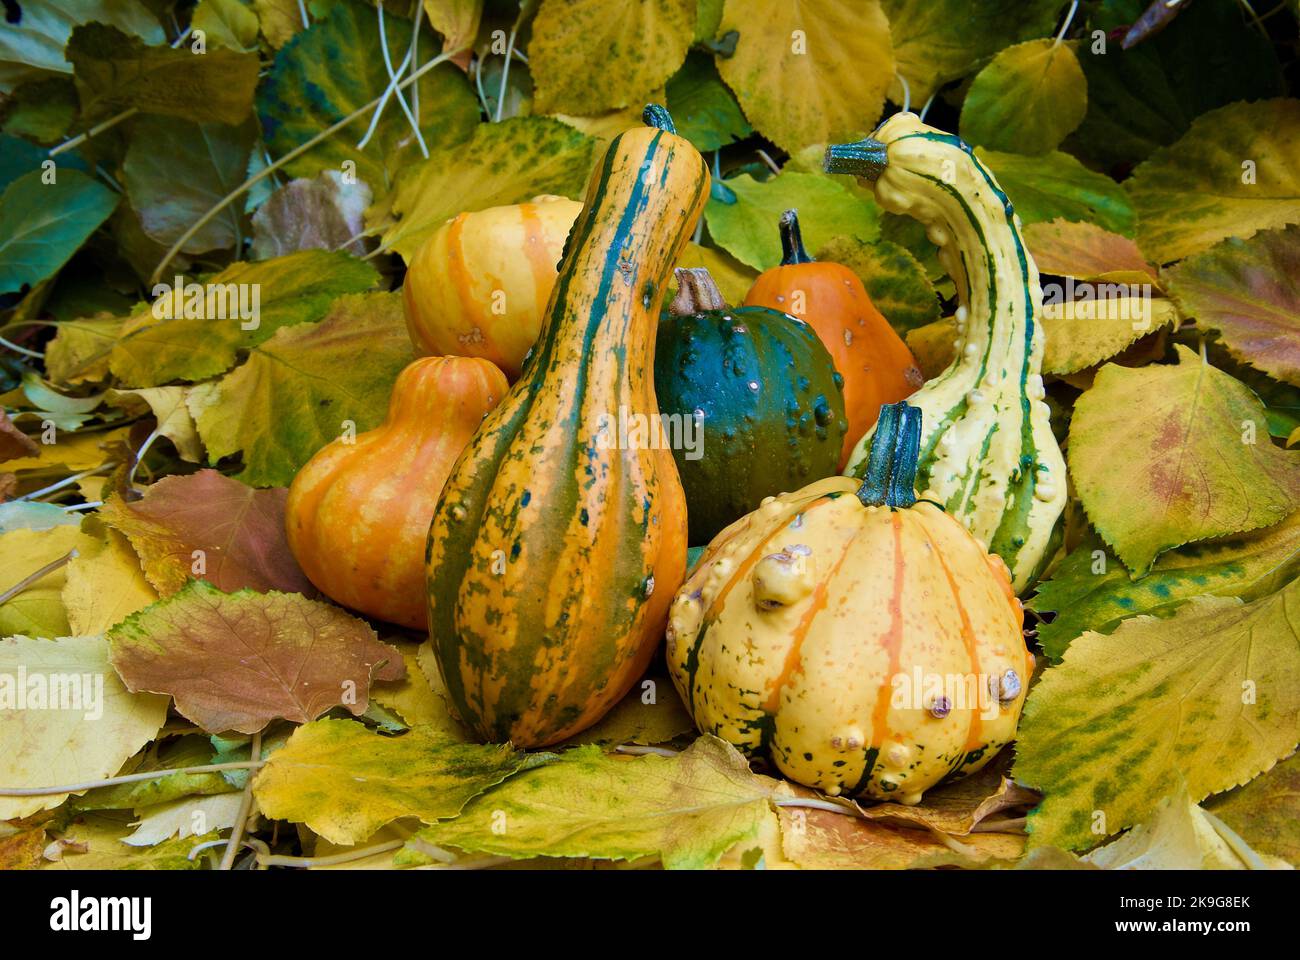 Small colorful pumpkins for decoration among fallen leaves in the garden in autumn. Stock Photo